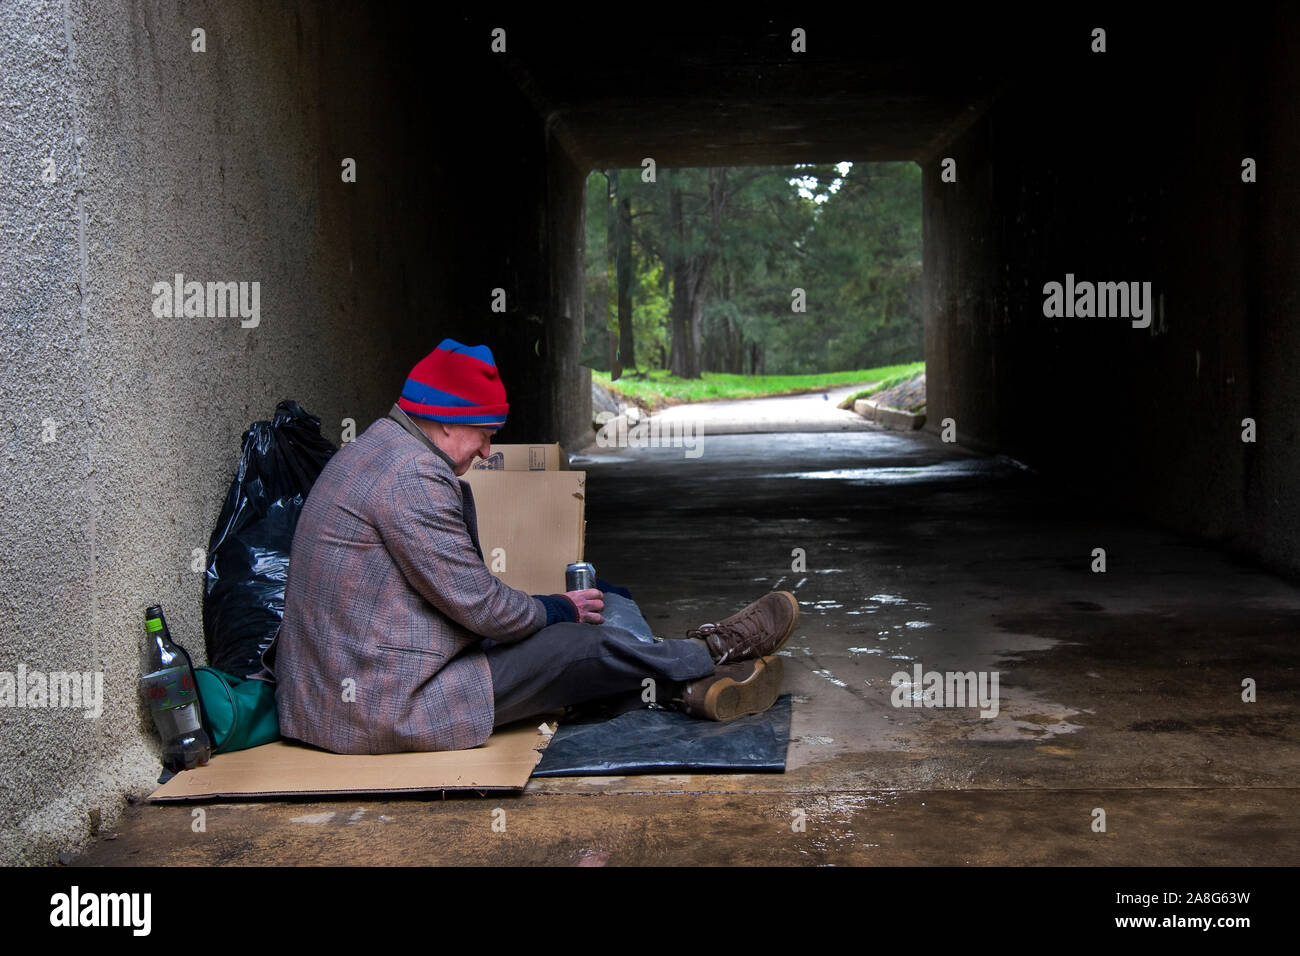 Homeless man shelters from rain in underpass in Canberra, Australia Stock Photo